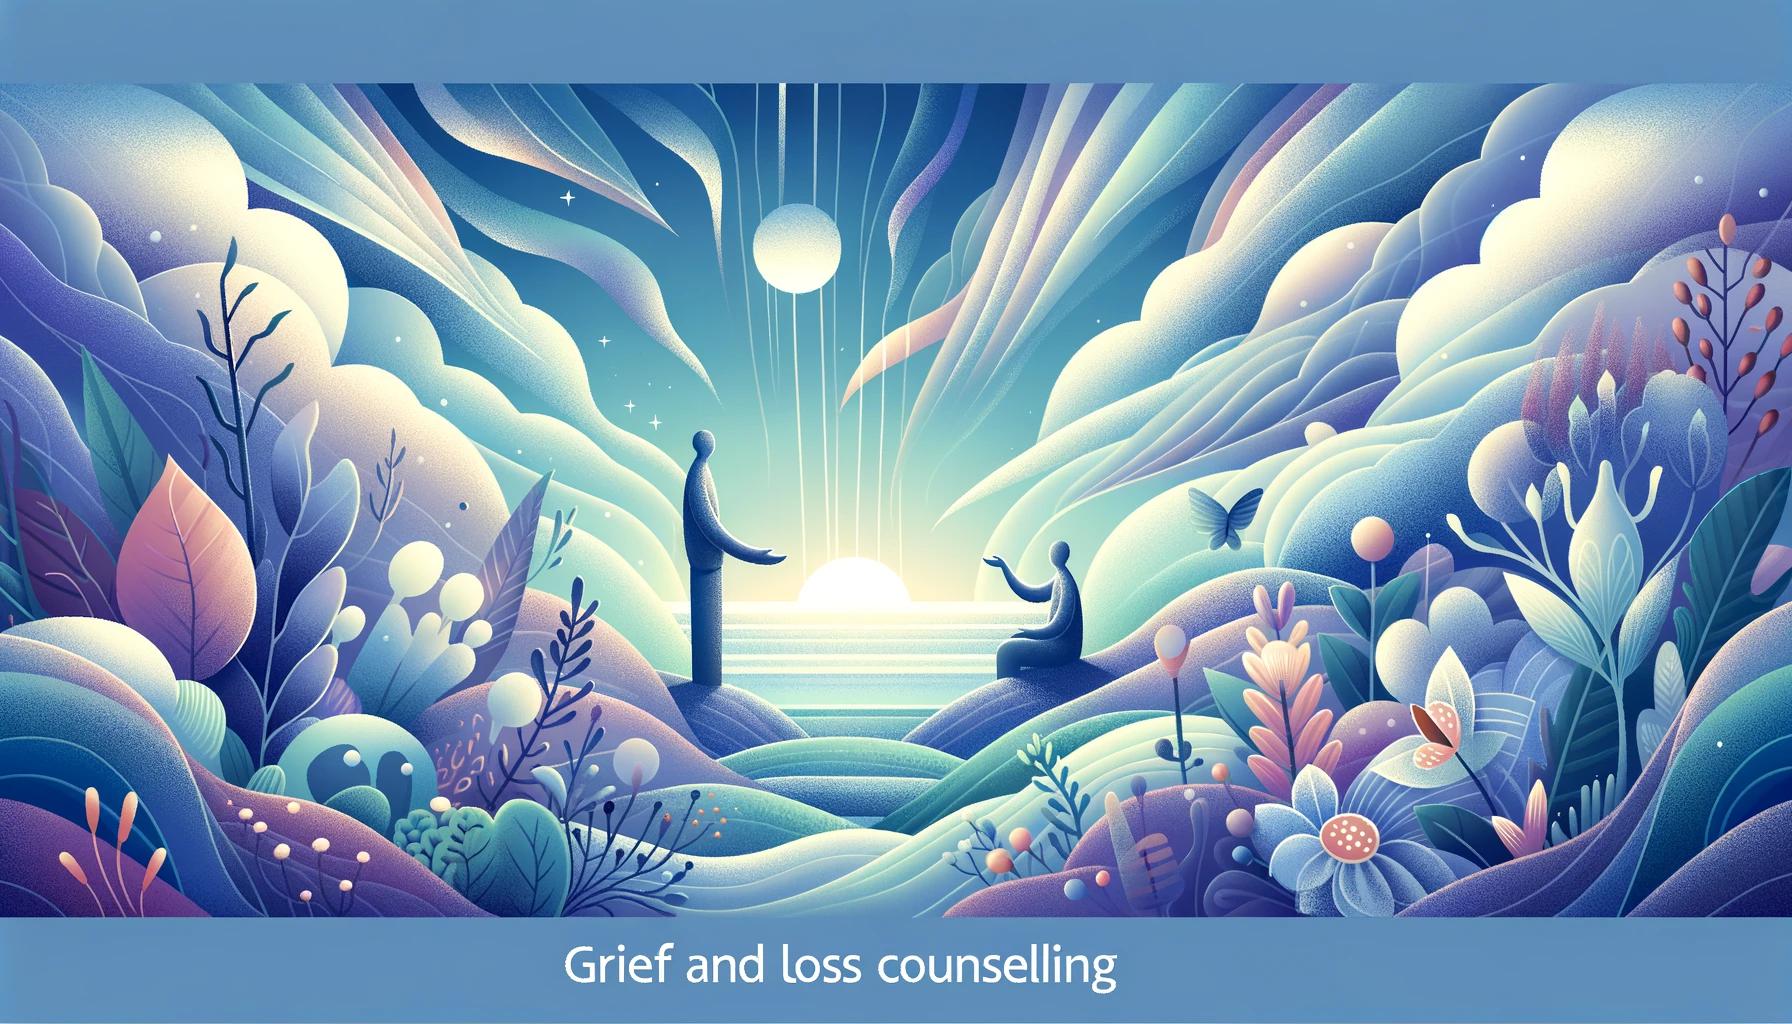 Illustrated grief and loss.